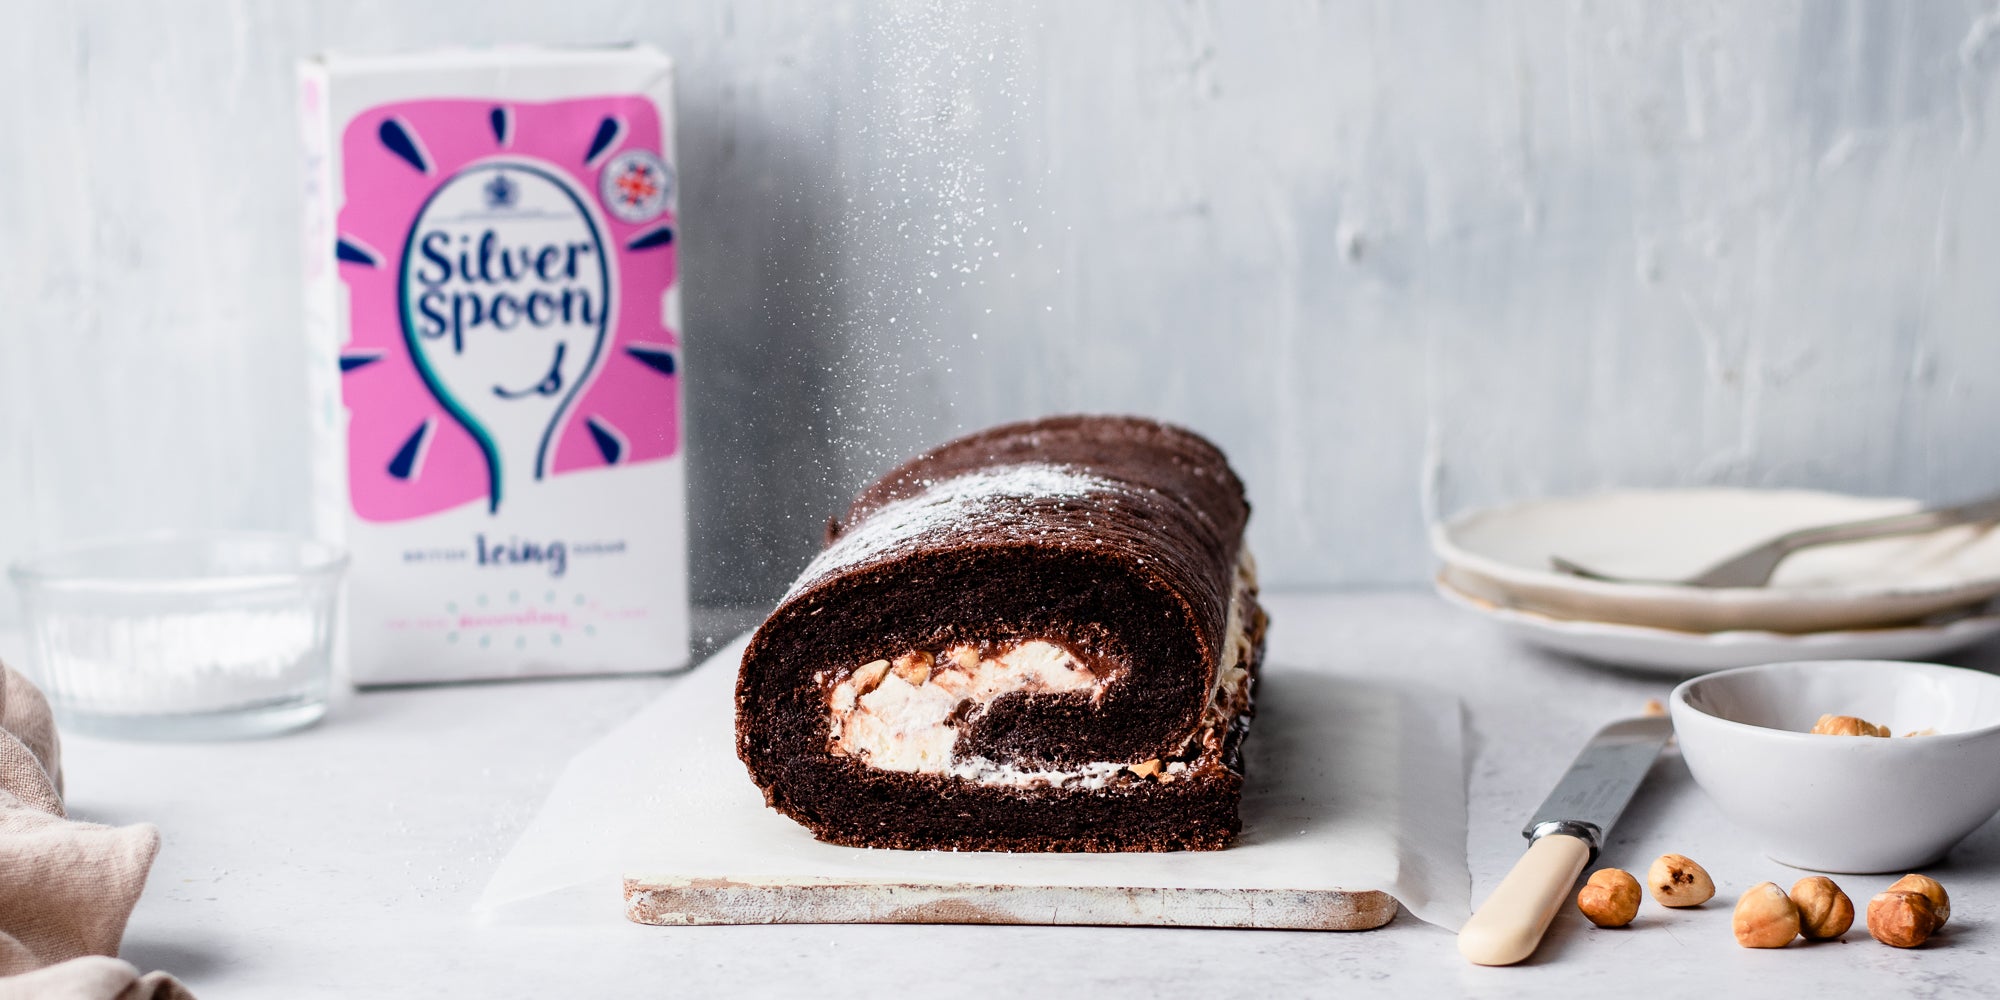 Chocolate Roulade with a box of Silver Spoon Icing Sugar in the background, next to a knife ready to serve, and hazelnuts